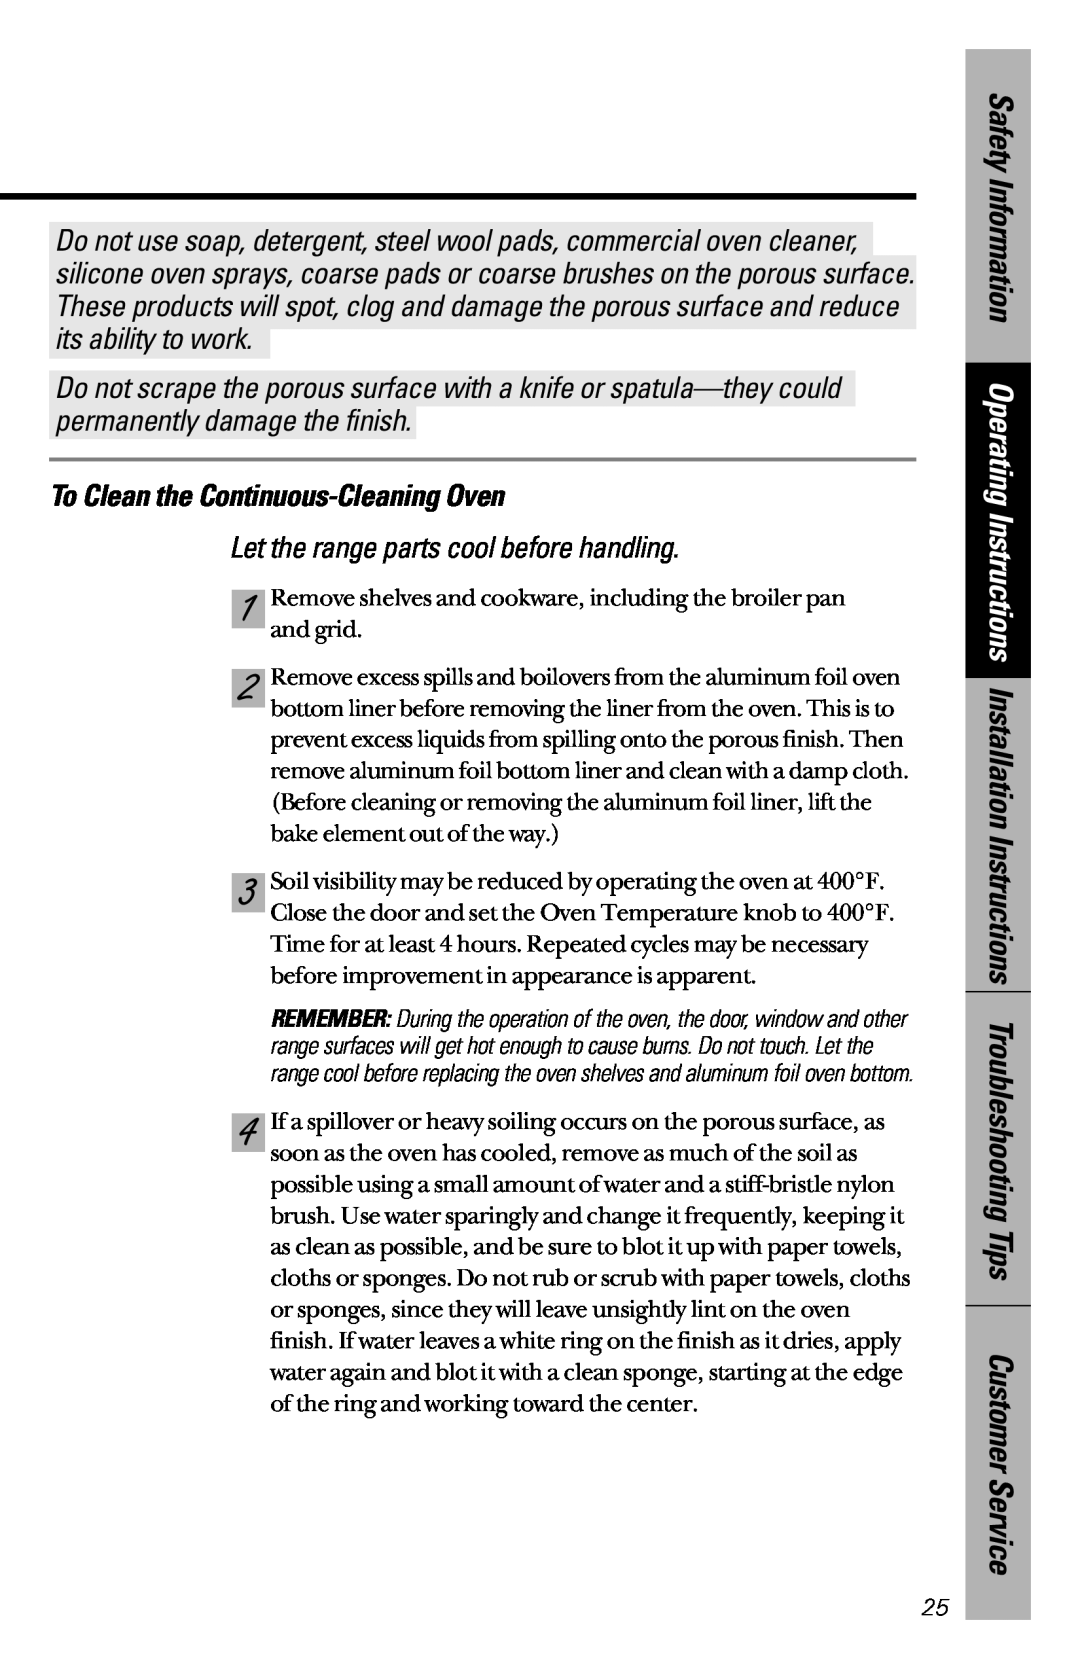 GE JBS26, JBC27 owner manual To Clean the Continuous-Cleaning Oven, Let the range parts cool before handling 